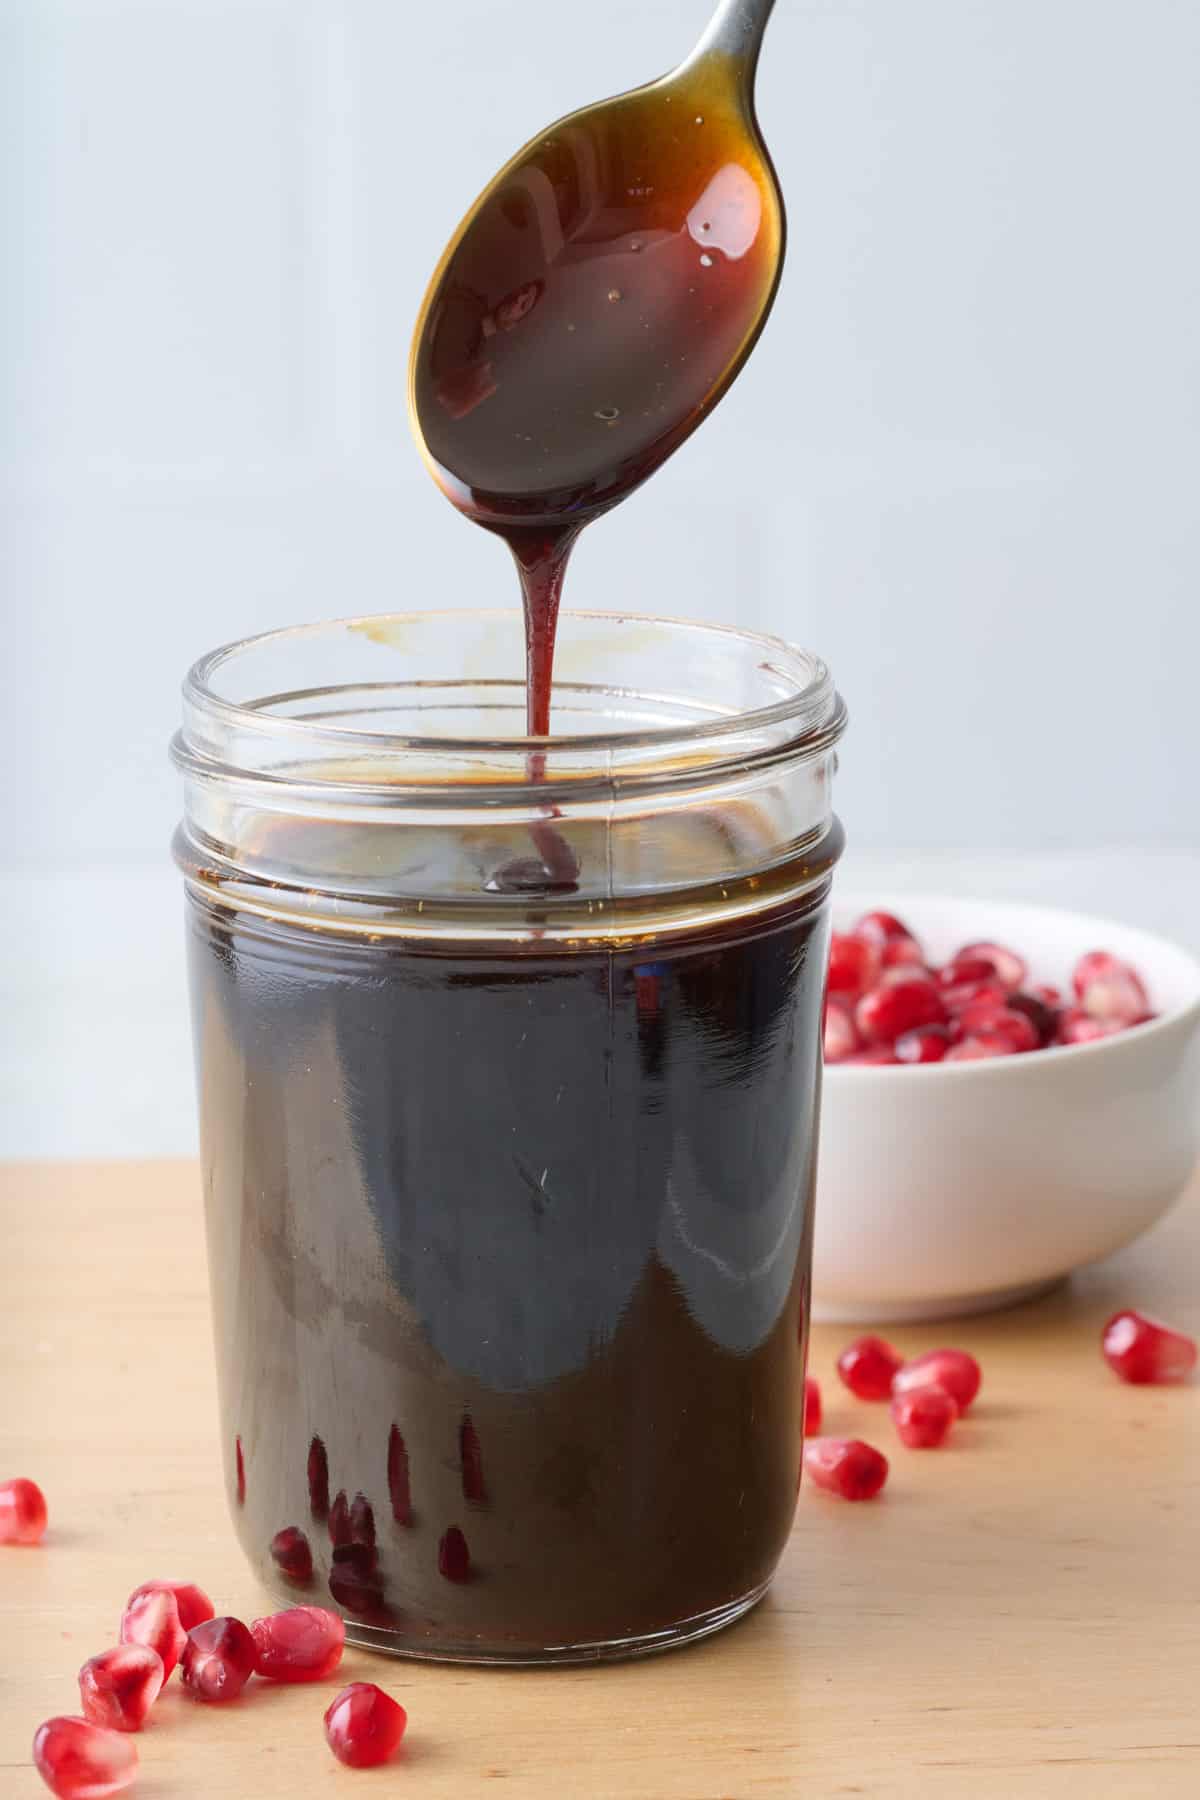 Spoon drizzling pomegranate molasses back into jar from above. Small bowl of pomegranate seeds nearby.